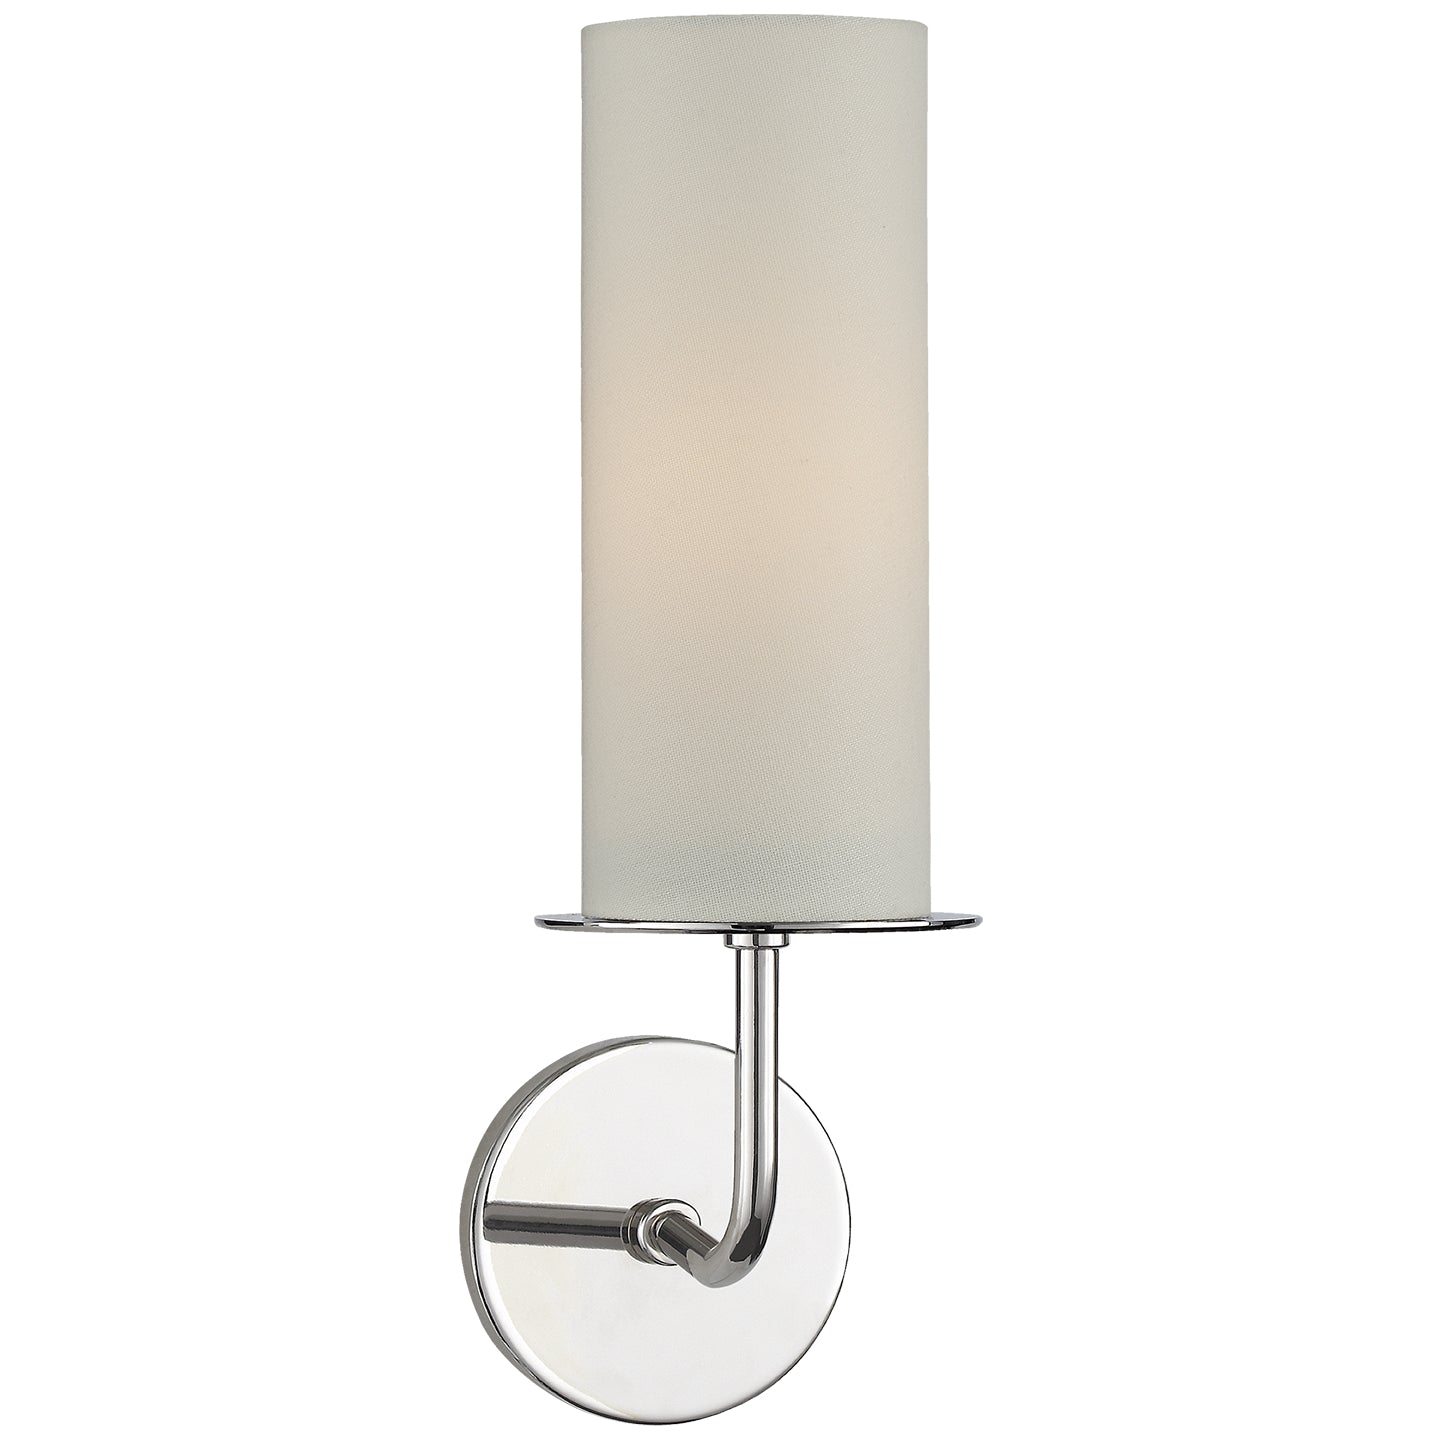 Load image into Gallery viewer, Visual Comfort Signature - KS 2035PN-L - One Light Wall Sconce - Larabee - Polished Nickel
